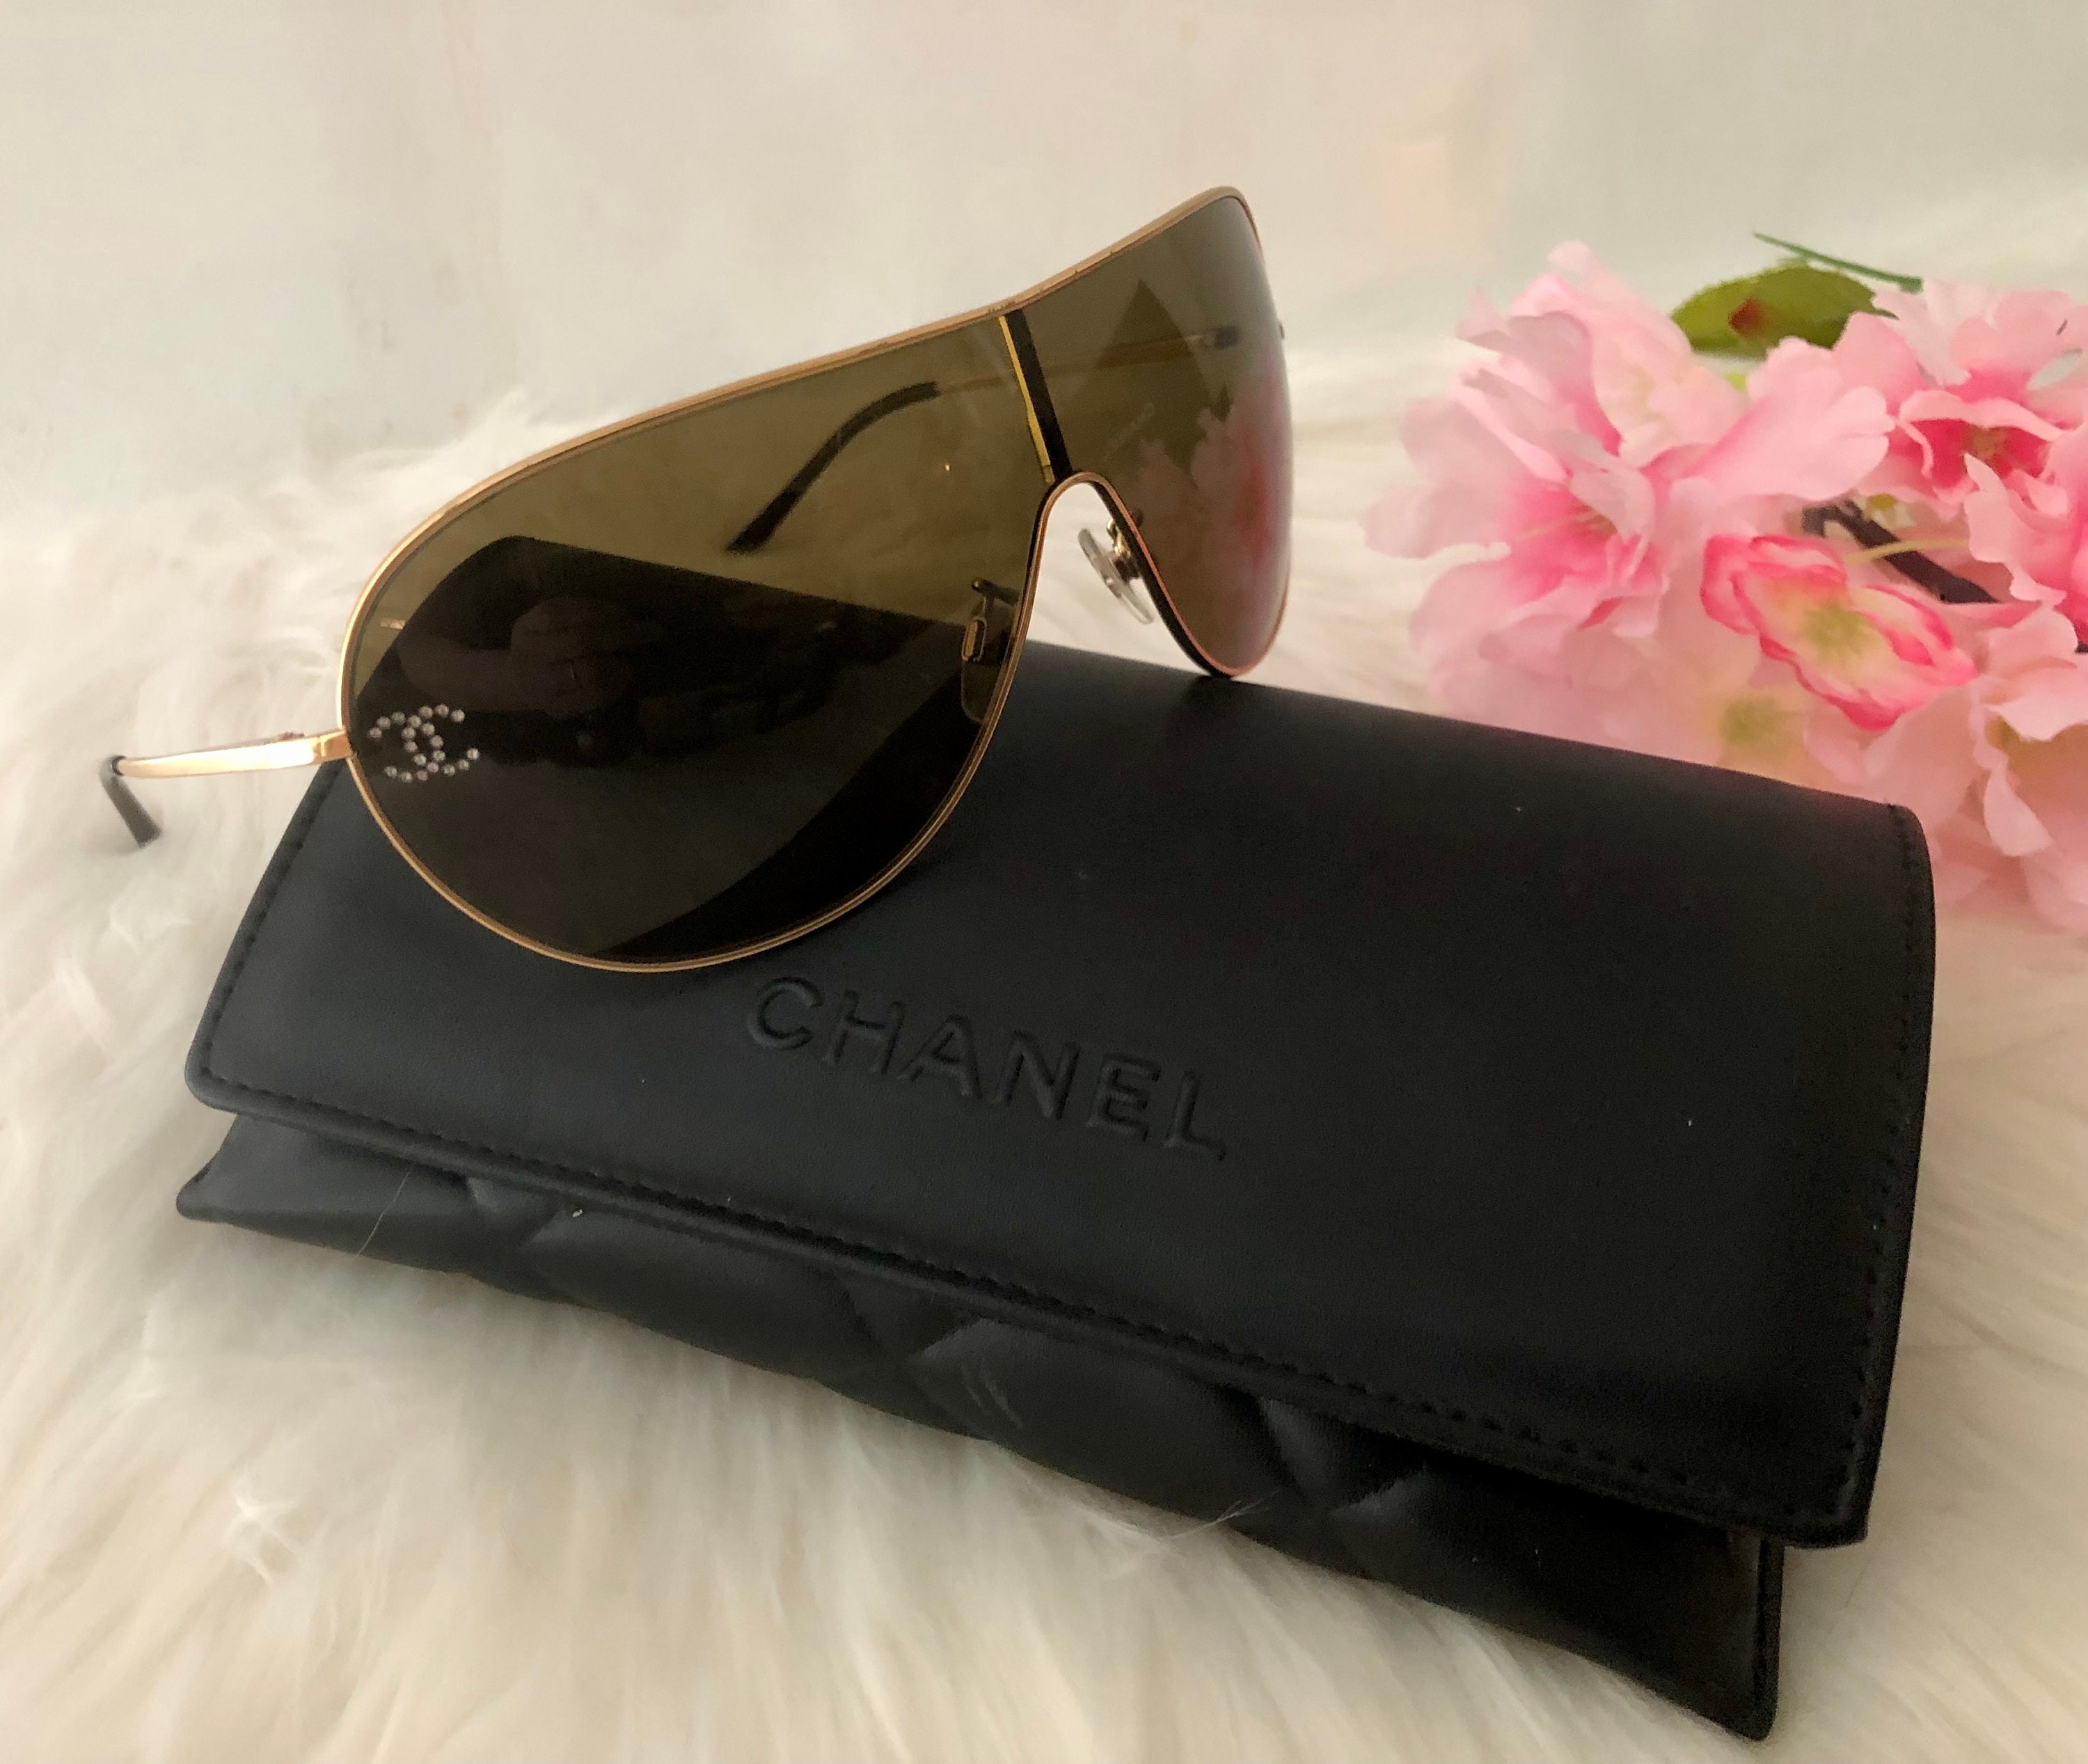 Chanel Coco Charms 3437 C501 Glasses